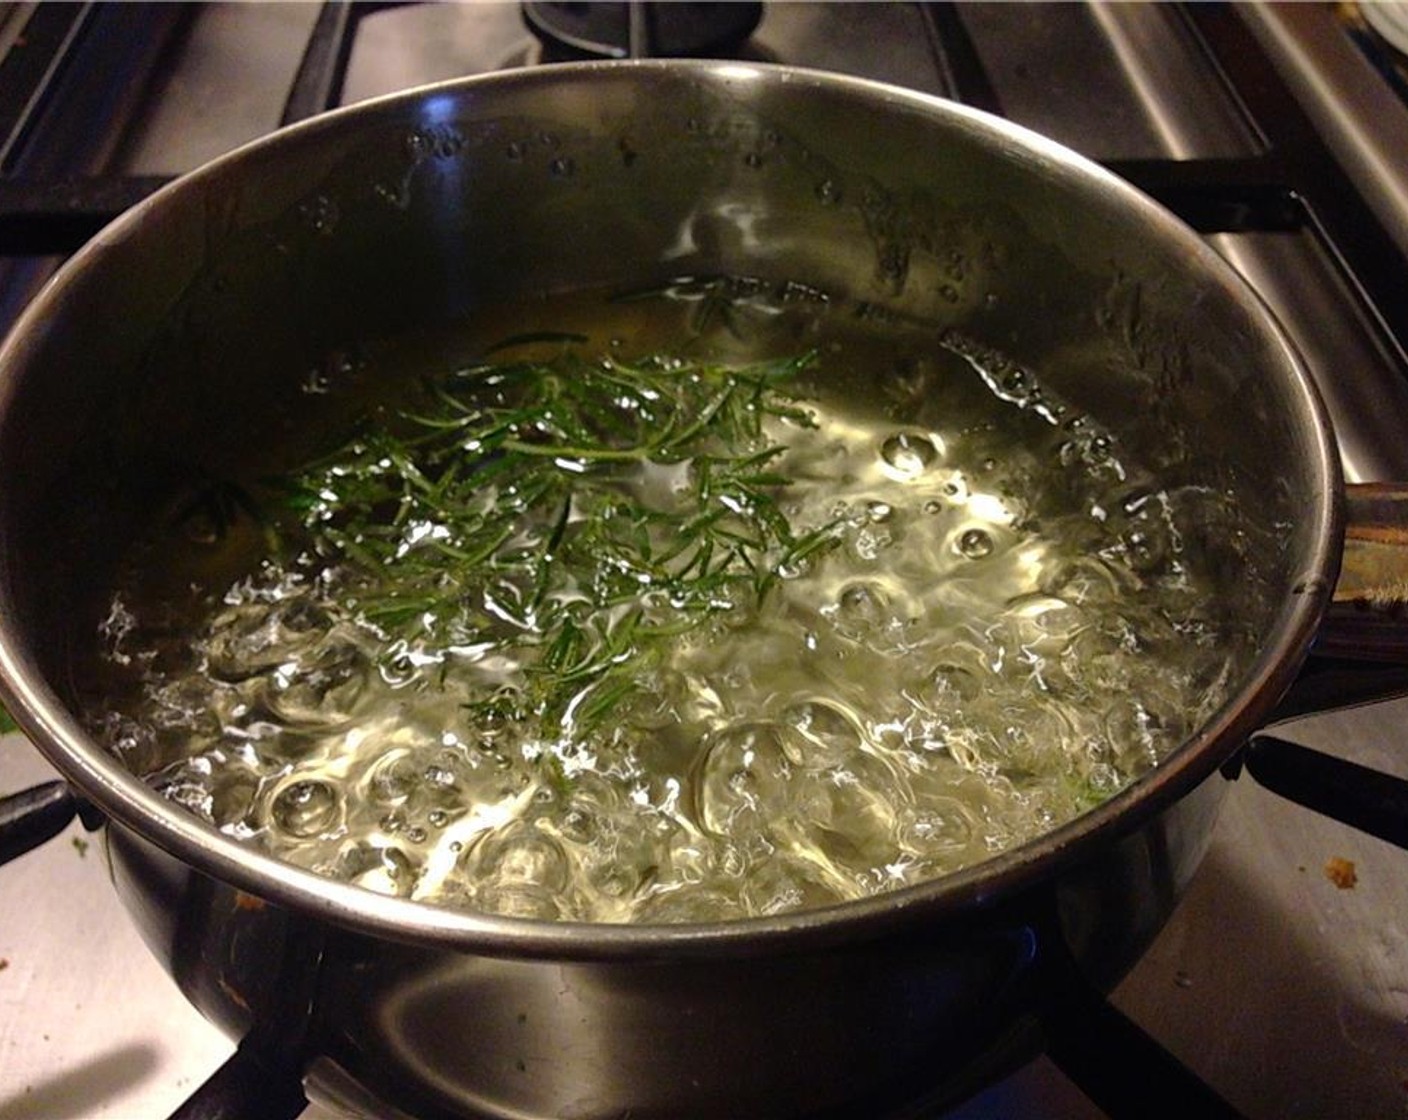 step 2 Bring the Water (1 cup), Granulated Sugar (1 cup), and the rosemary to a boil then turn off the heat.